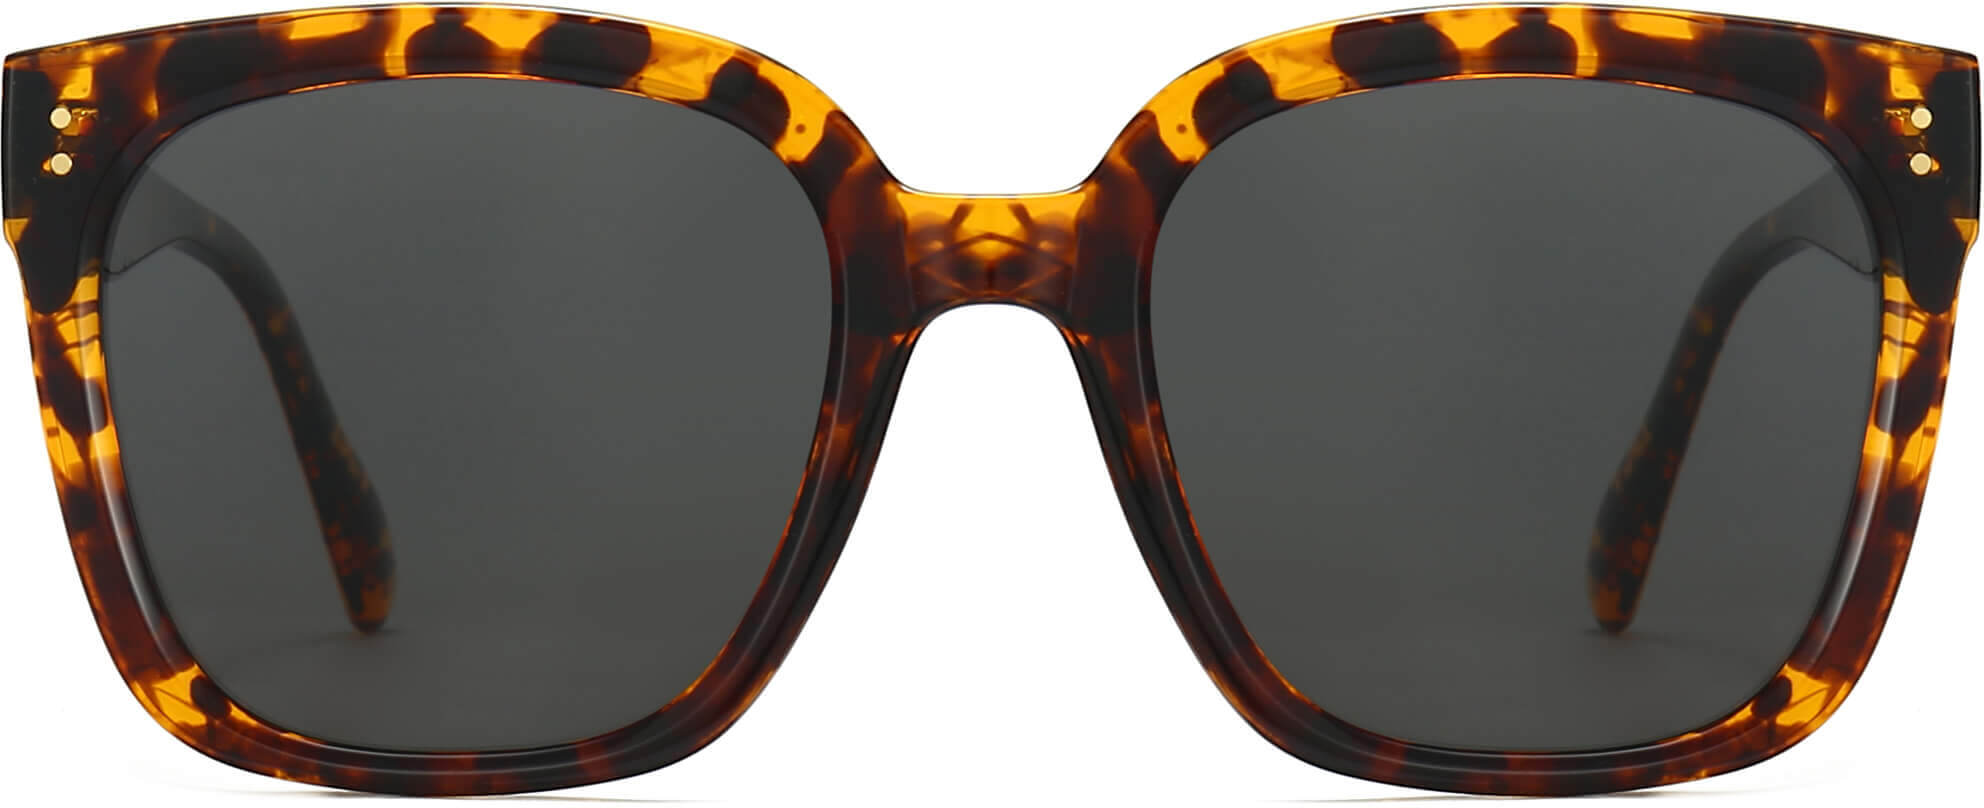 Sawyer Tortoise Plastic Sunglasses from ANRRI, front view